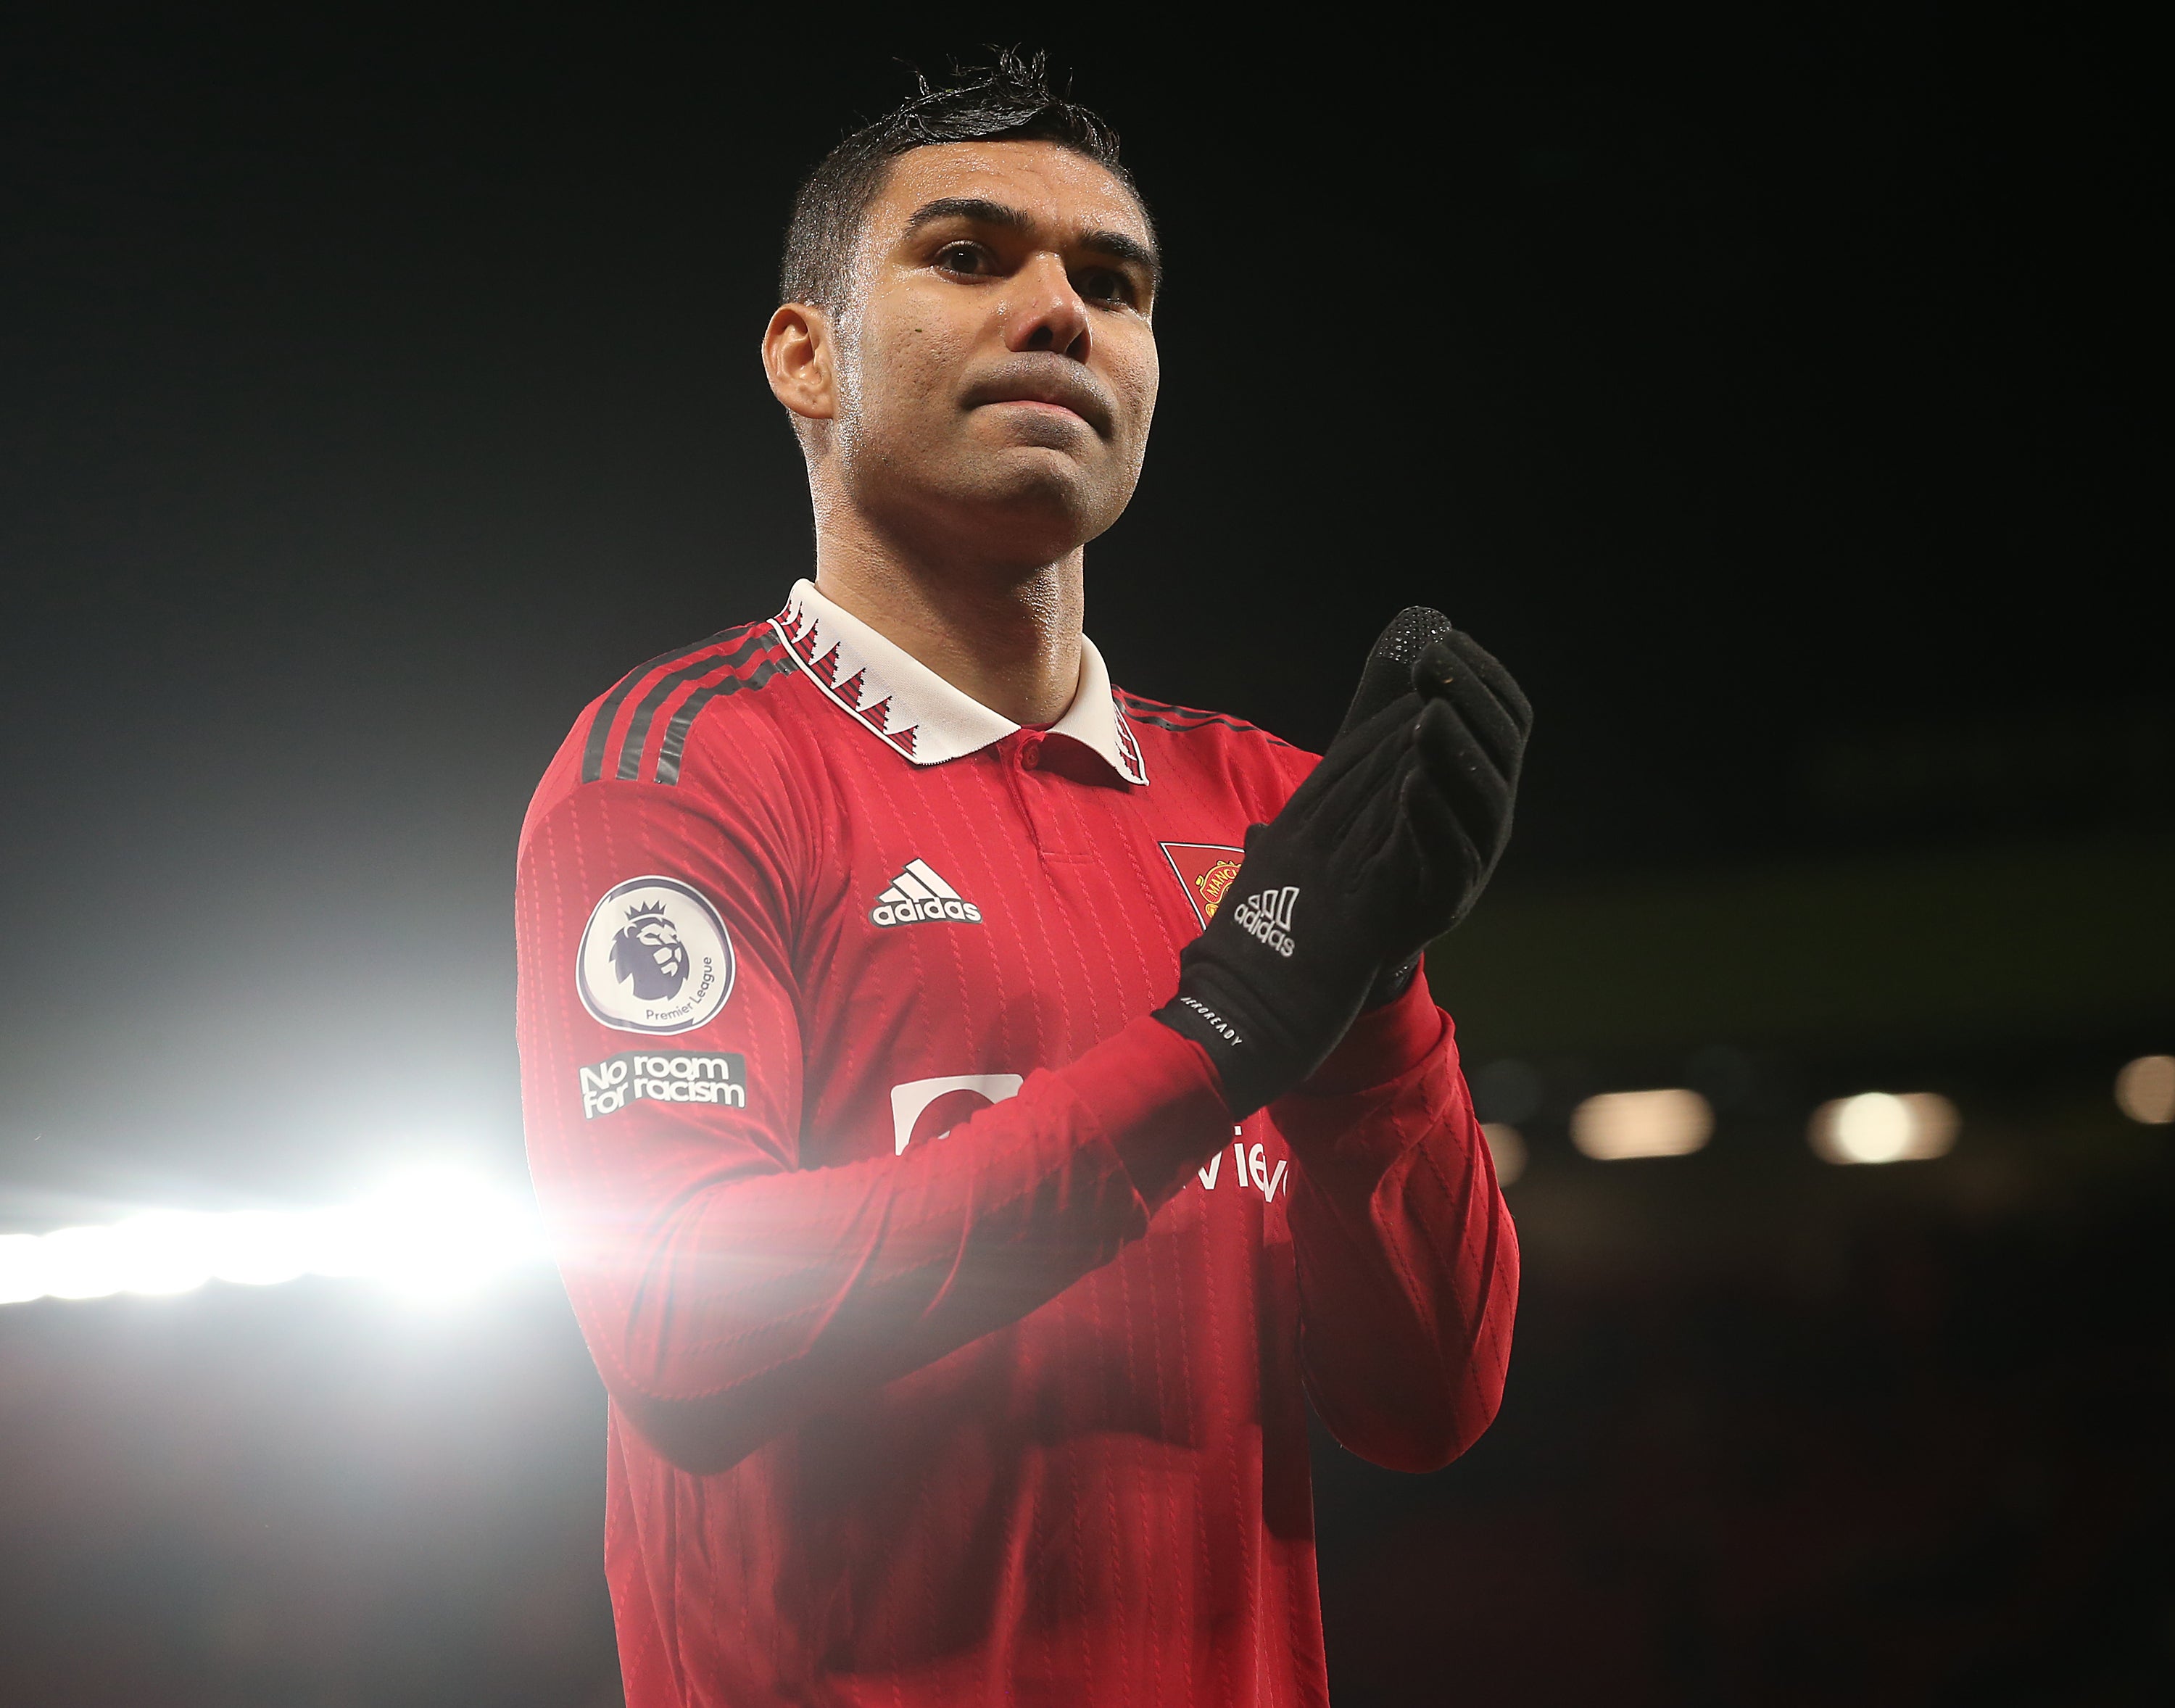 Casemiro of Manchester United walks off after victory over Bournemouth